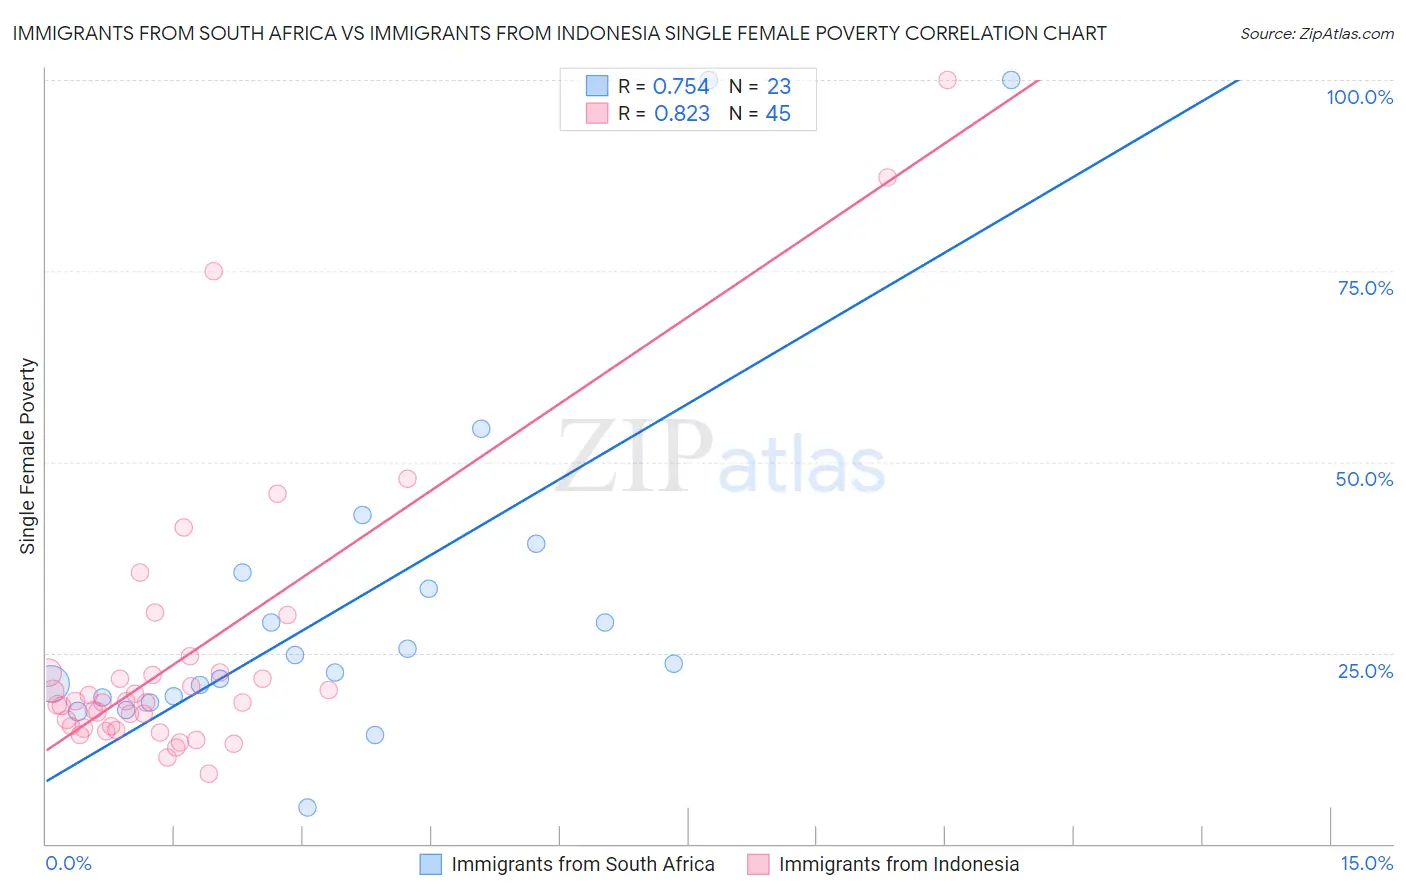 Immigrants from South Africa vs Immigrants from Indonesia Single Female Poverty